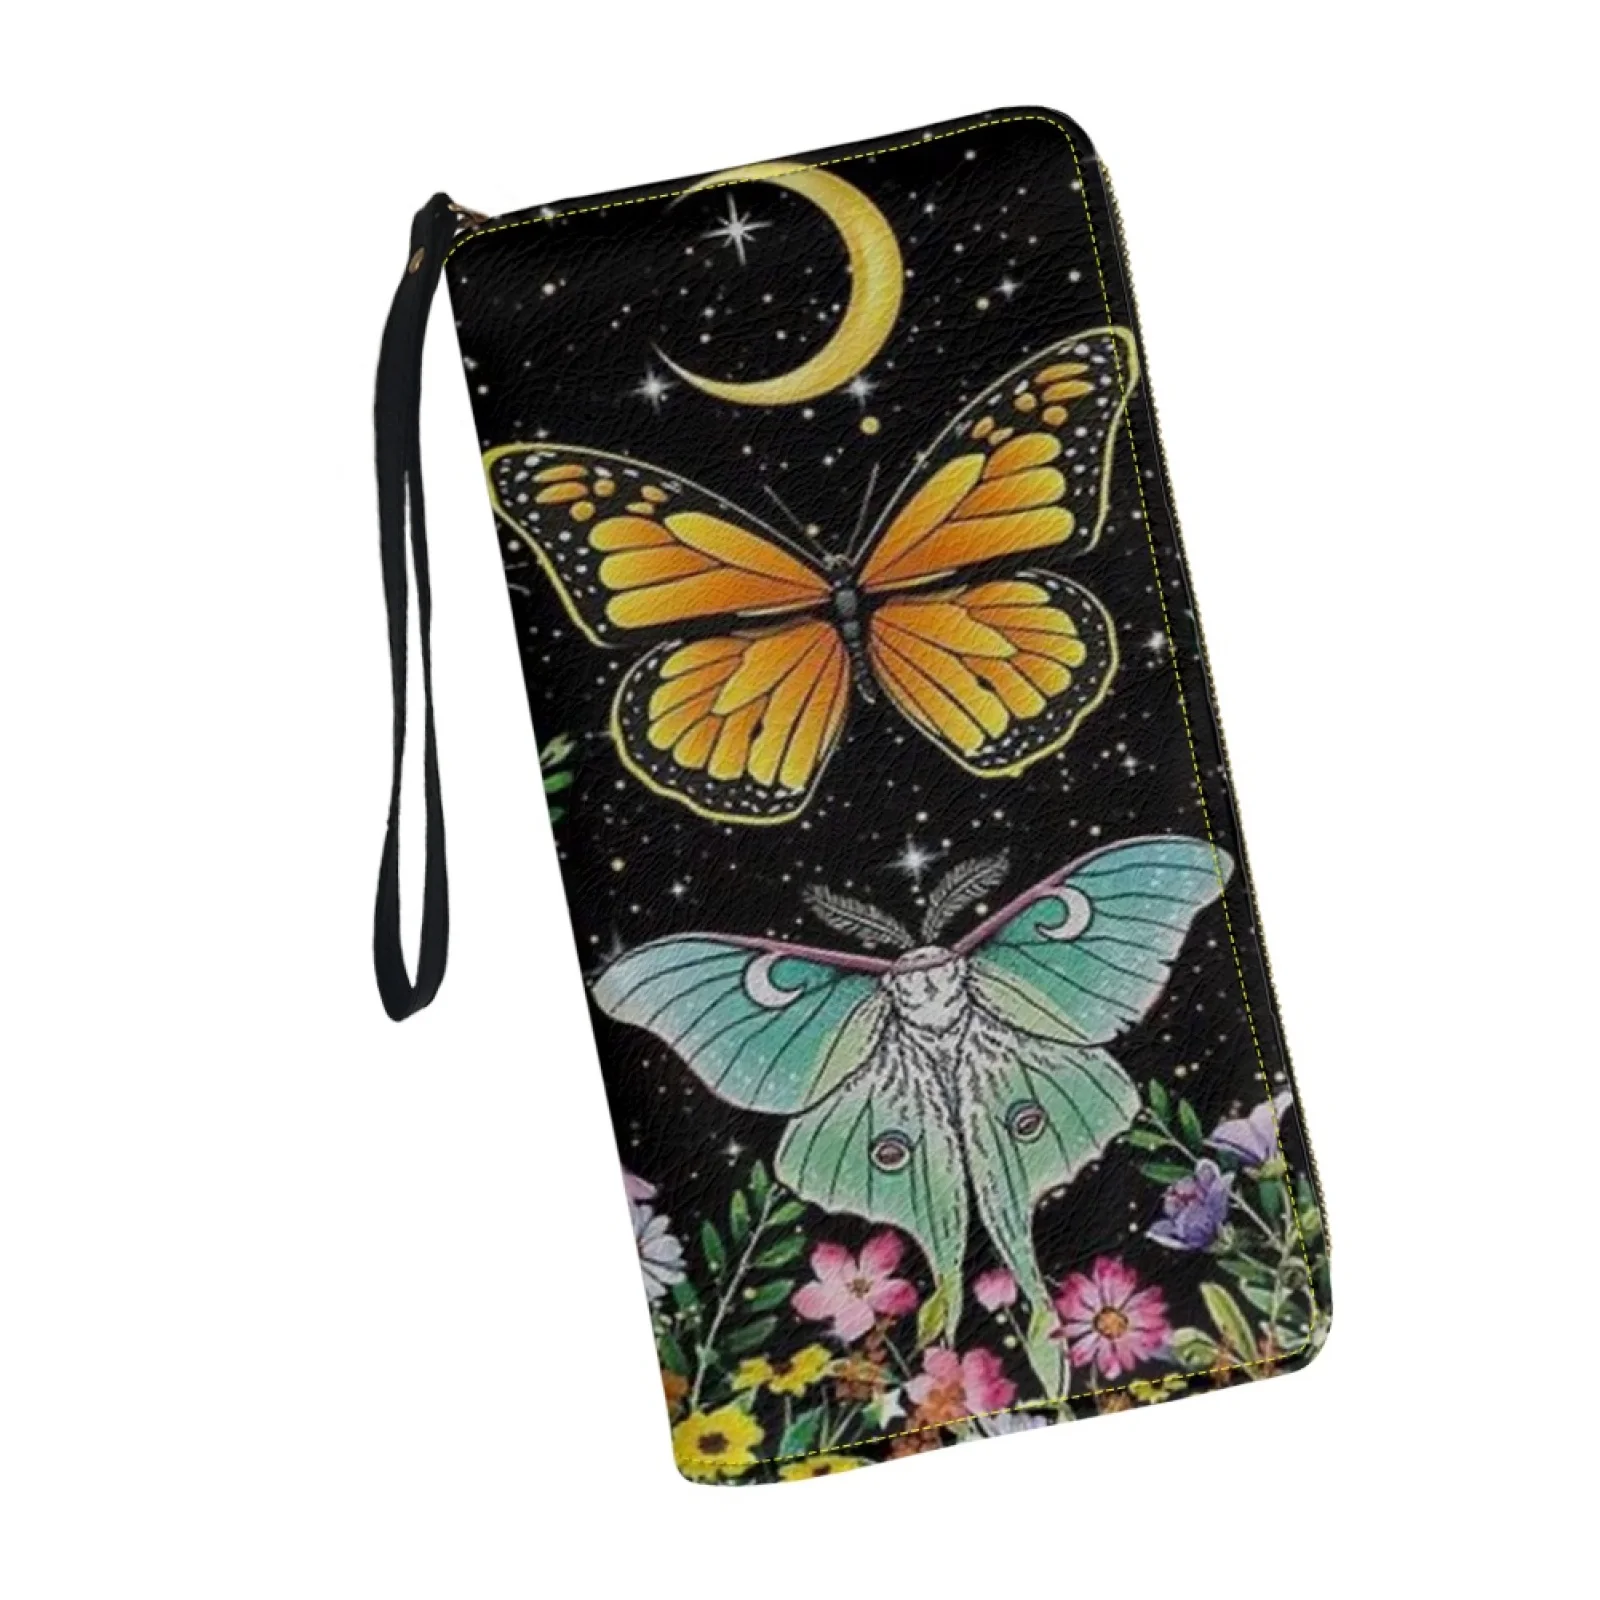 Belidome Butterfly Moon Wristlet Clutch Cell Phone Wallet for Womens PU Leather Card Holder Multi Card Organizer Wallets Purse